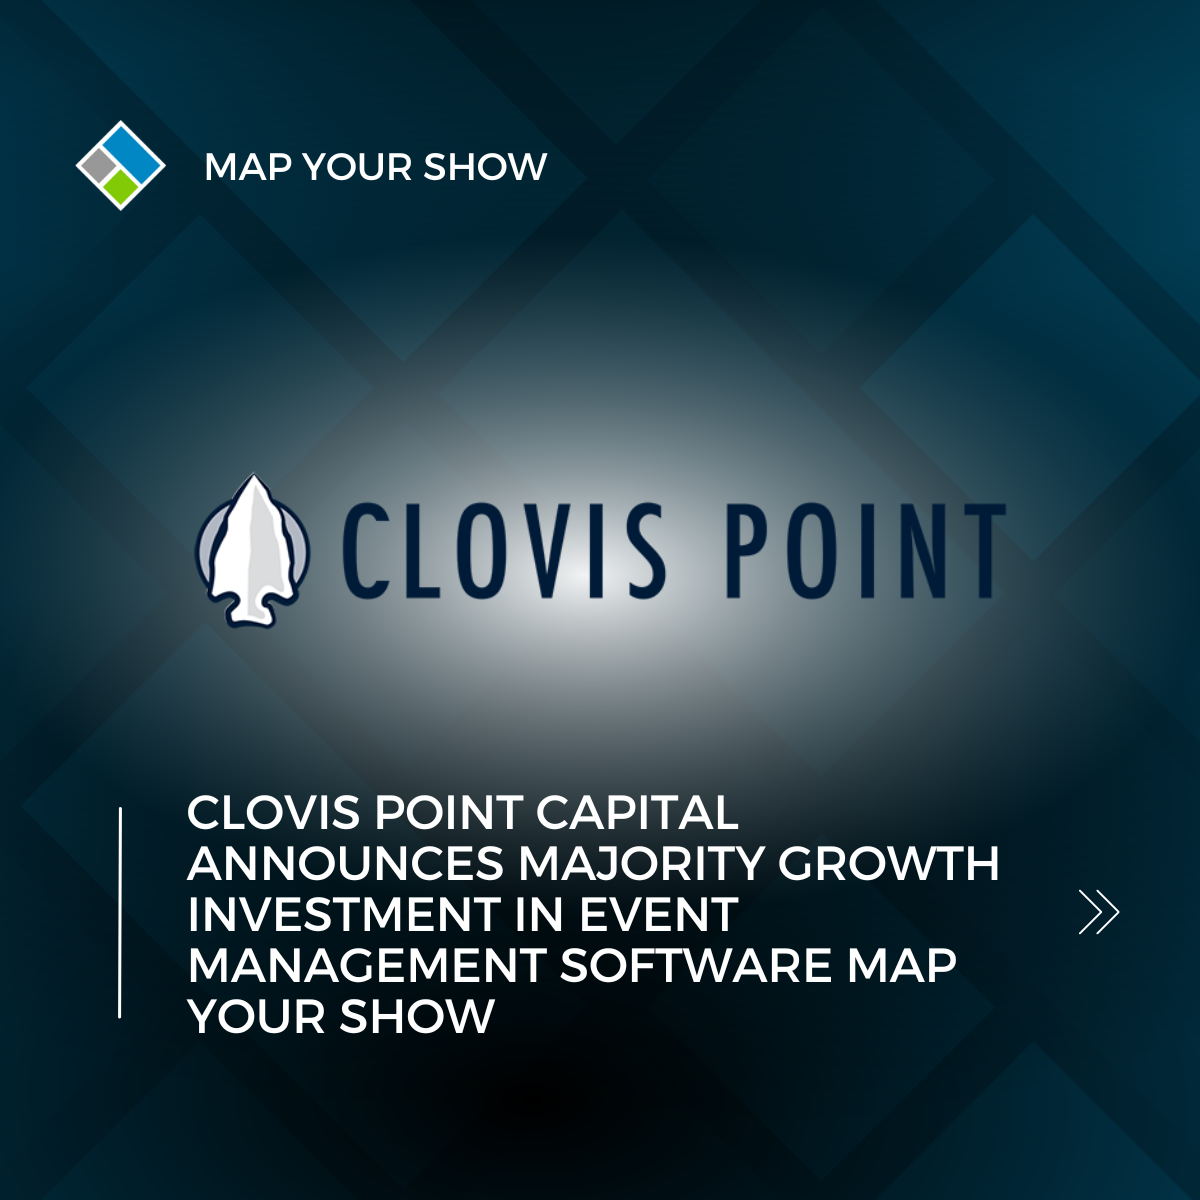 Clovis Point Capital Announces Majority Growth Investment in Event Management Software Map Your Show